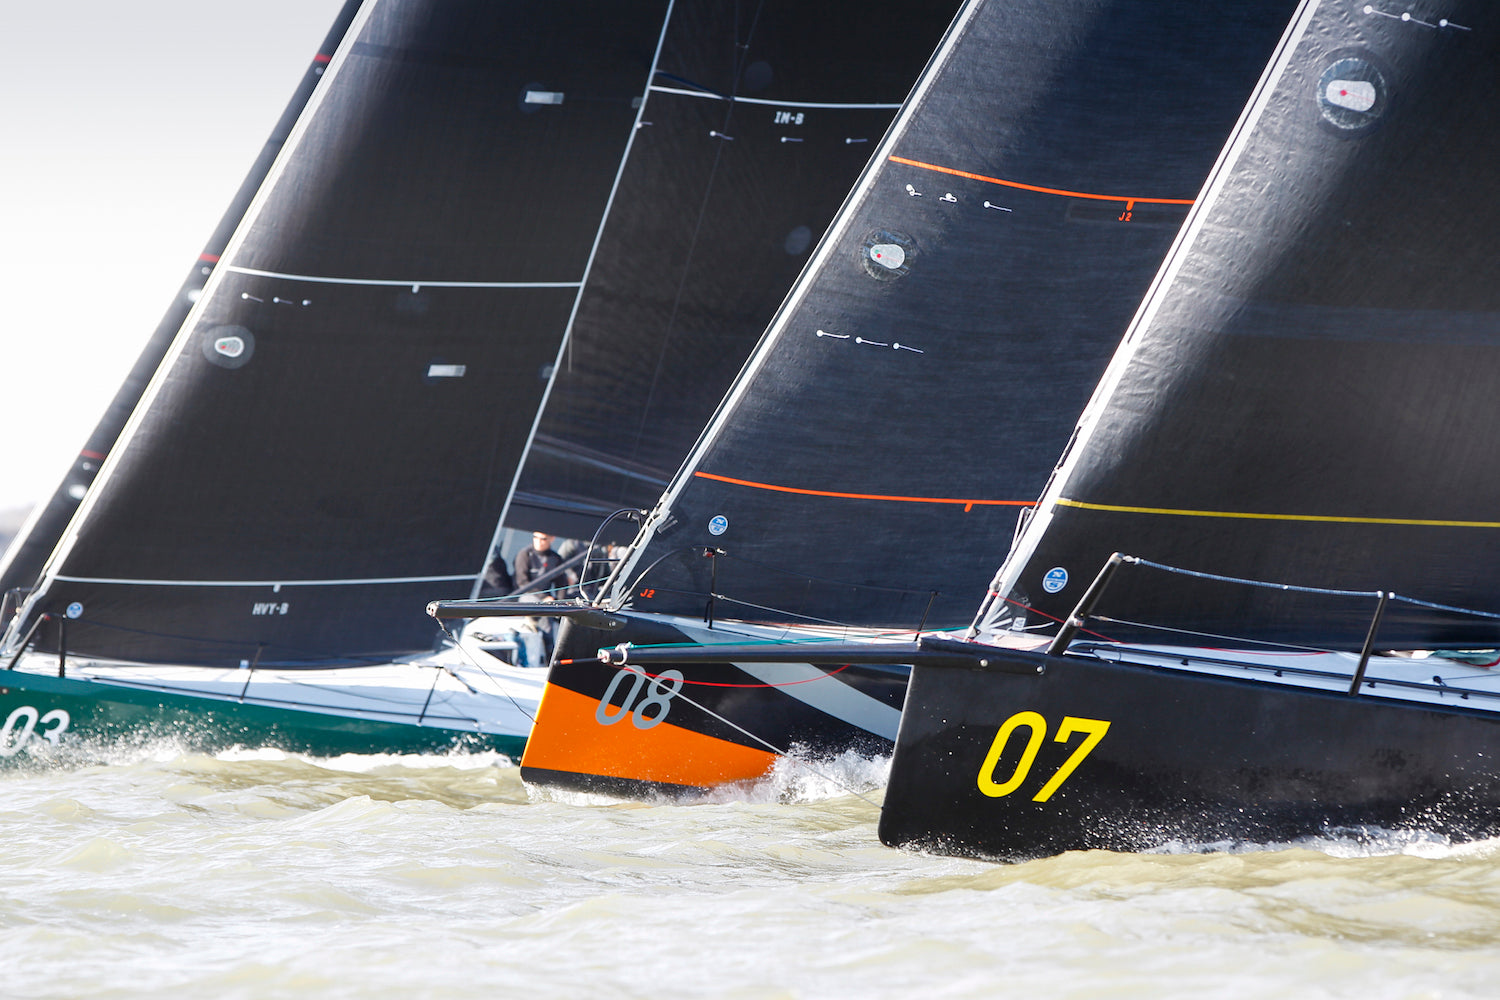 3Di AND PANELED SAILS: HOW IT’S MADE IS WHY IT’S DIFFERENT